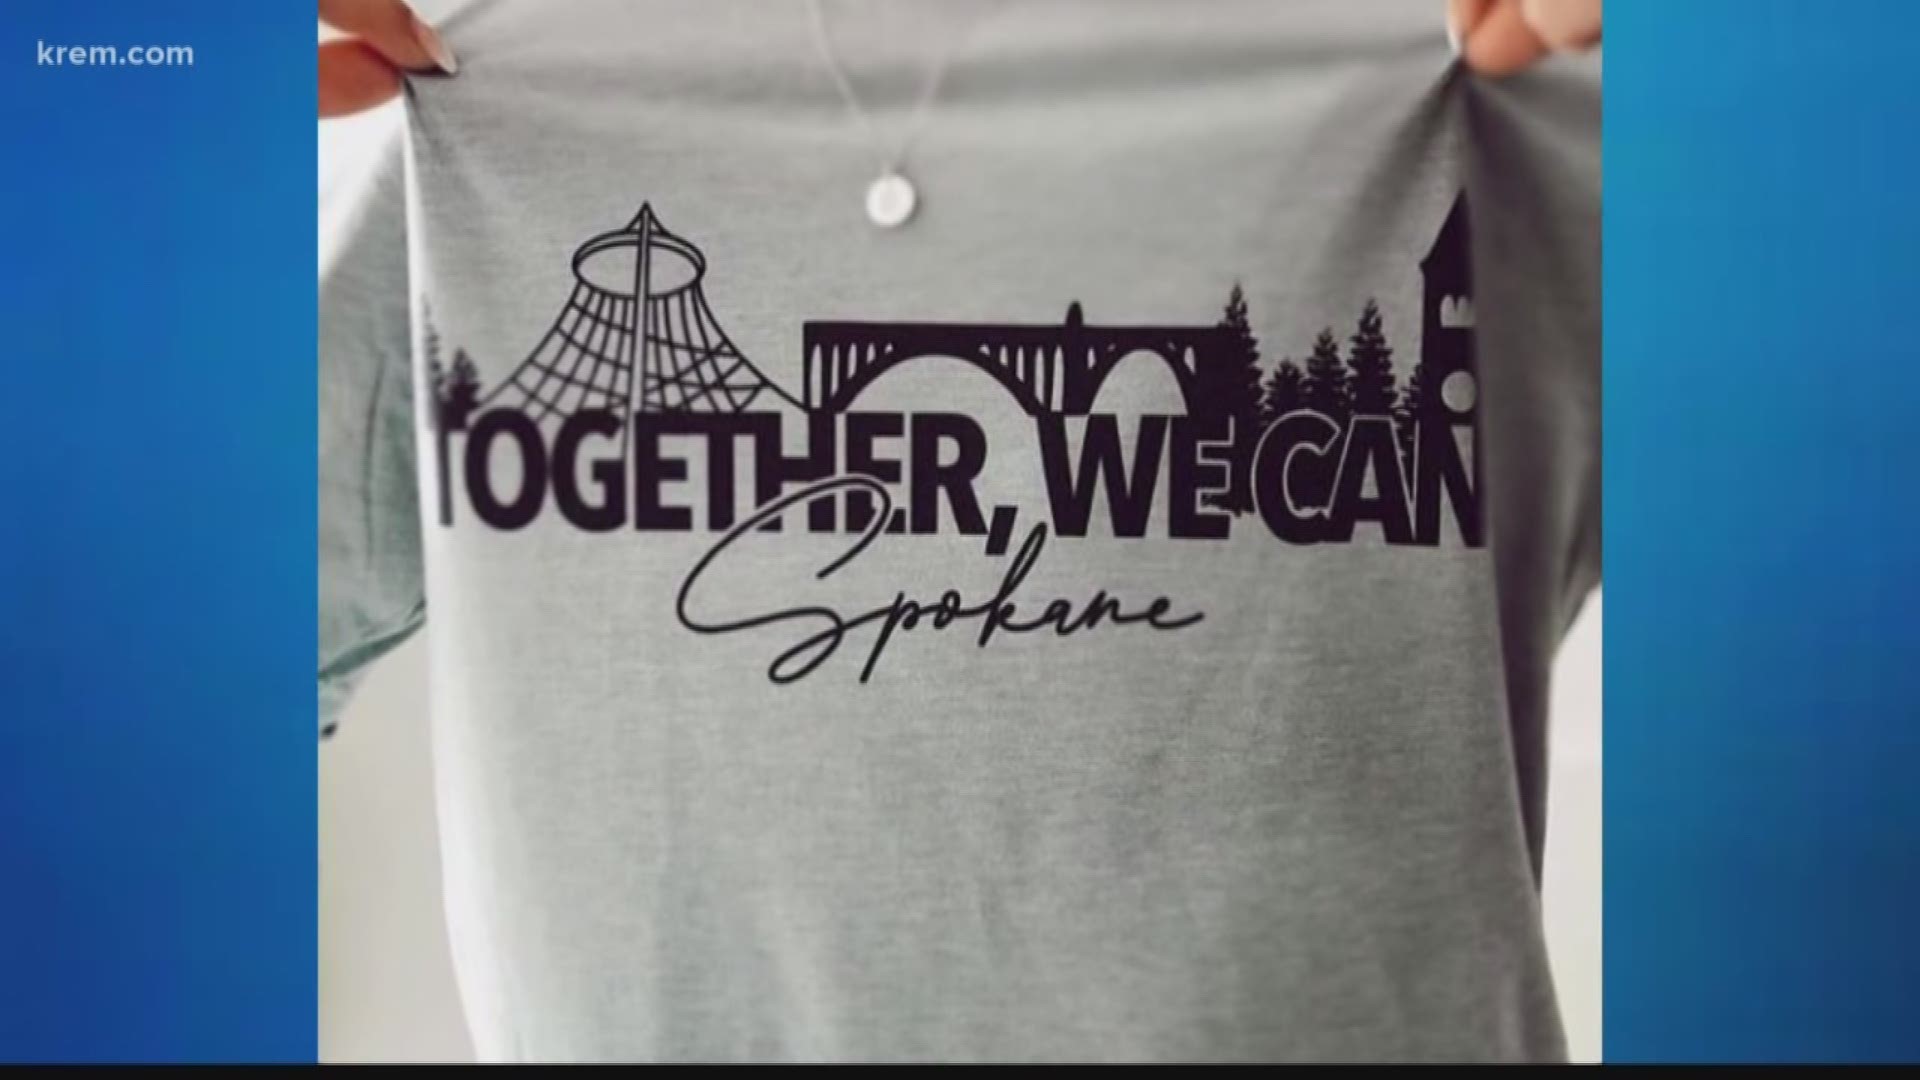 "Together, We Can Spokane" is more than a catchy phrase. Absolute Apparel designed a shirt to raise money for Dry Fly Distillery's hand sanitizer.